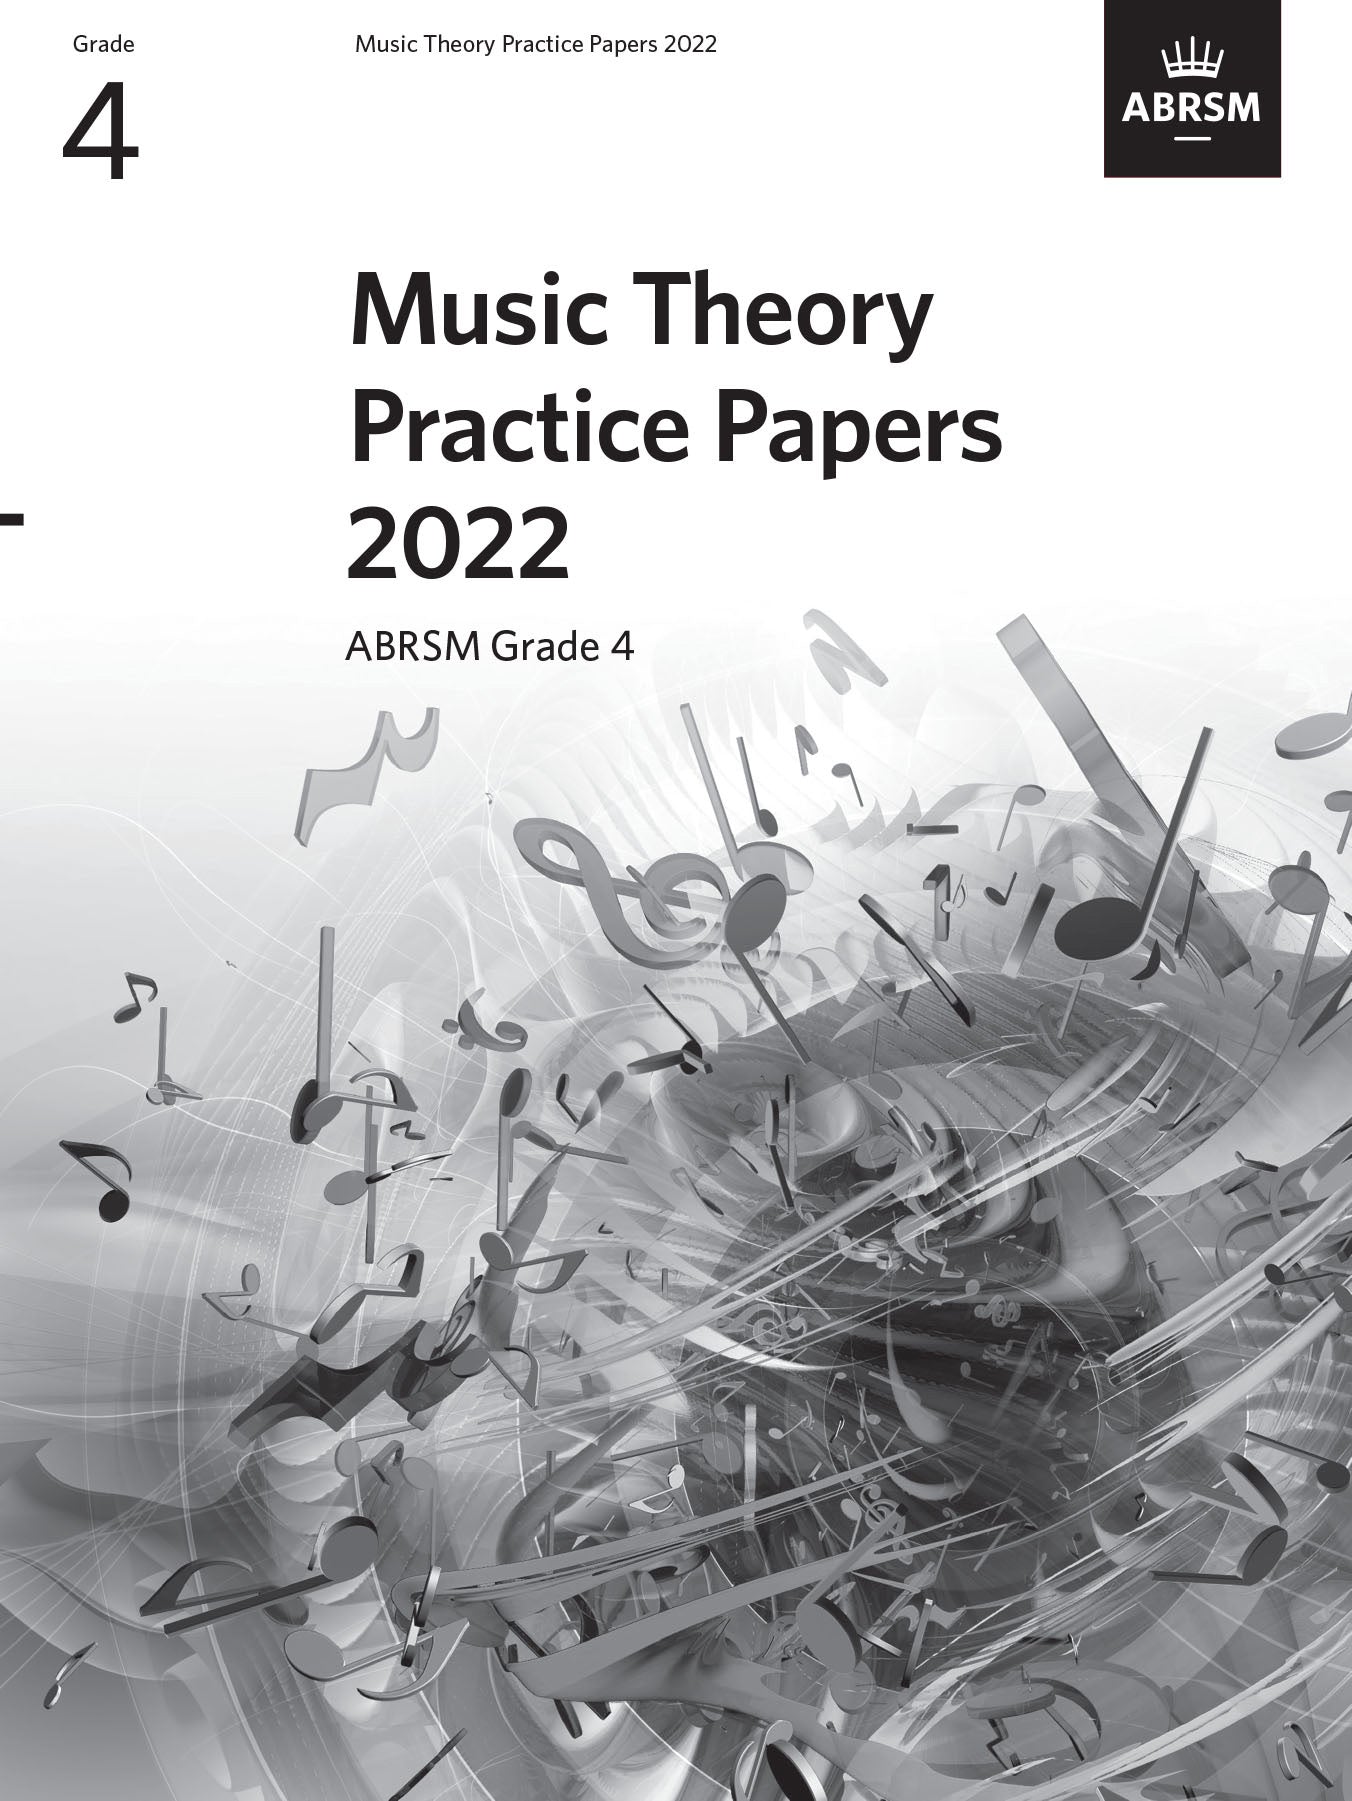 ABRSM Music Theory Practice Papers 2022 Grade 4